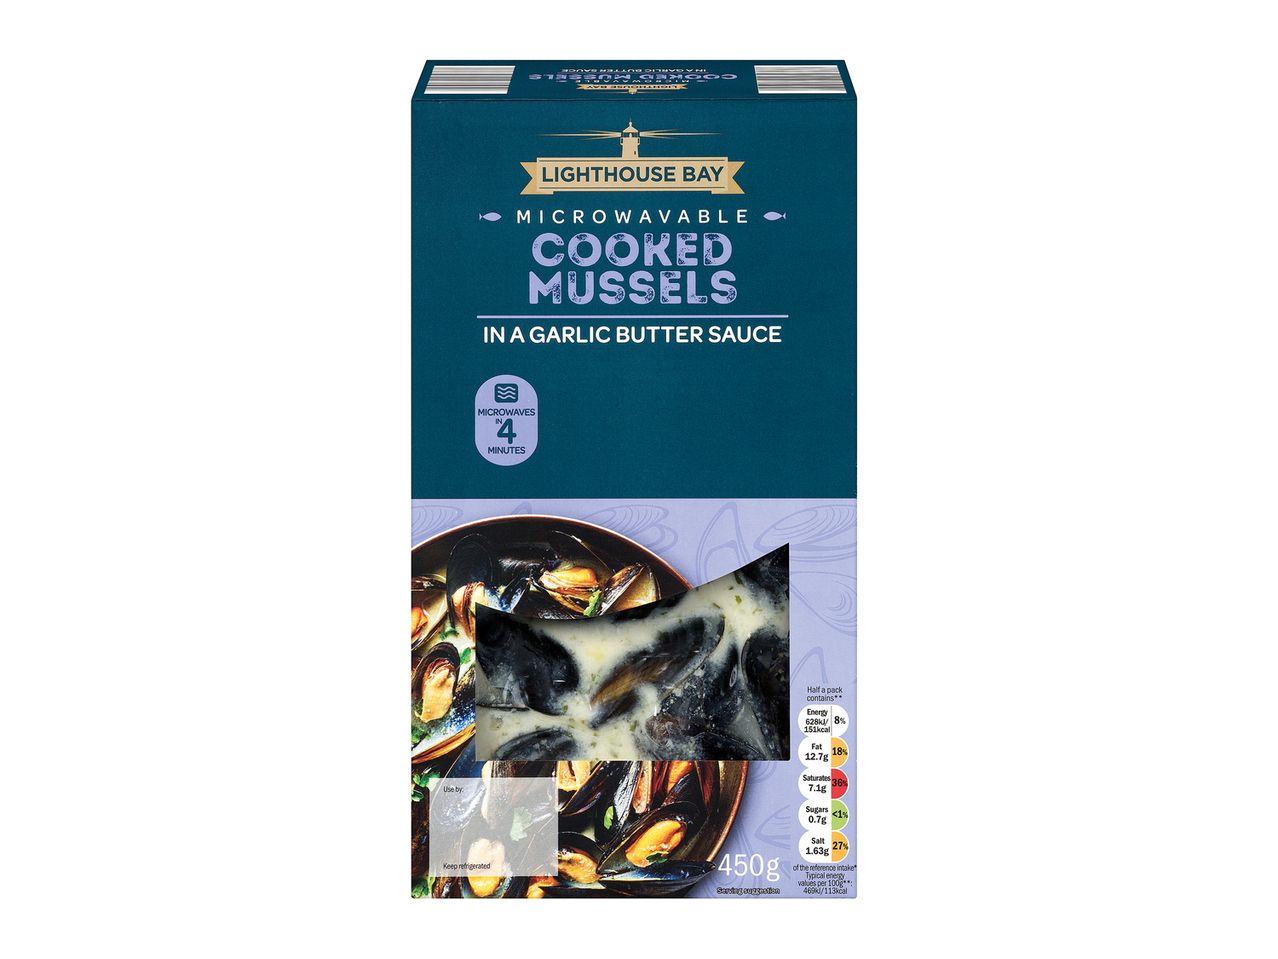 Go to full screen view: Lighthouse Bay Microwavable Cooked Mussels - Image 2